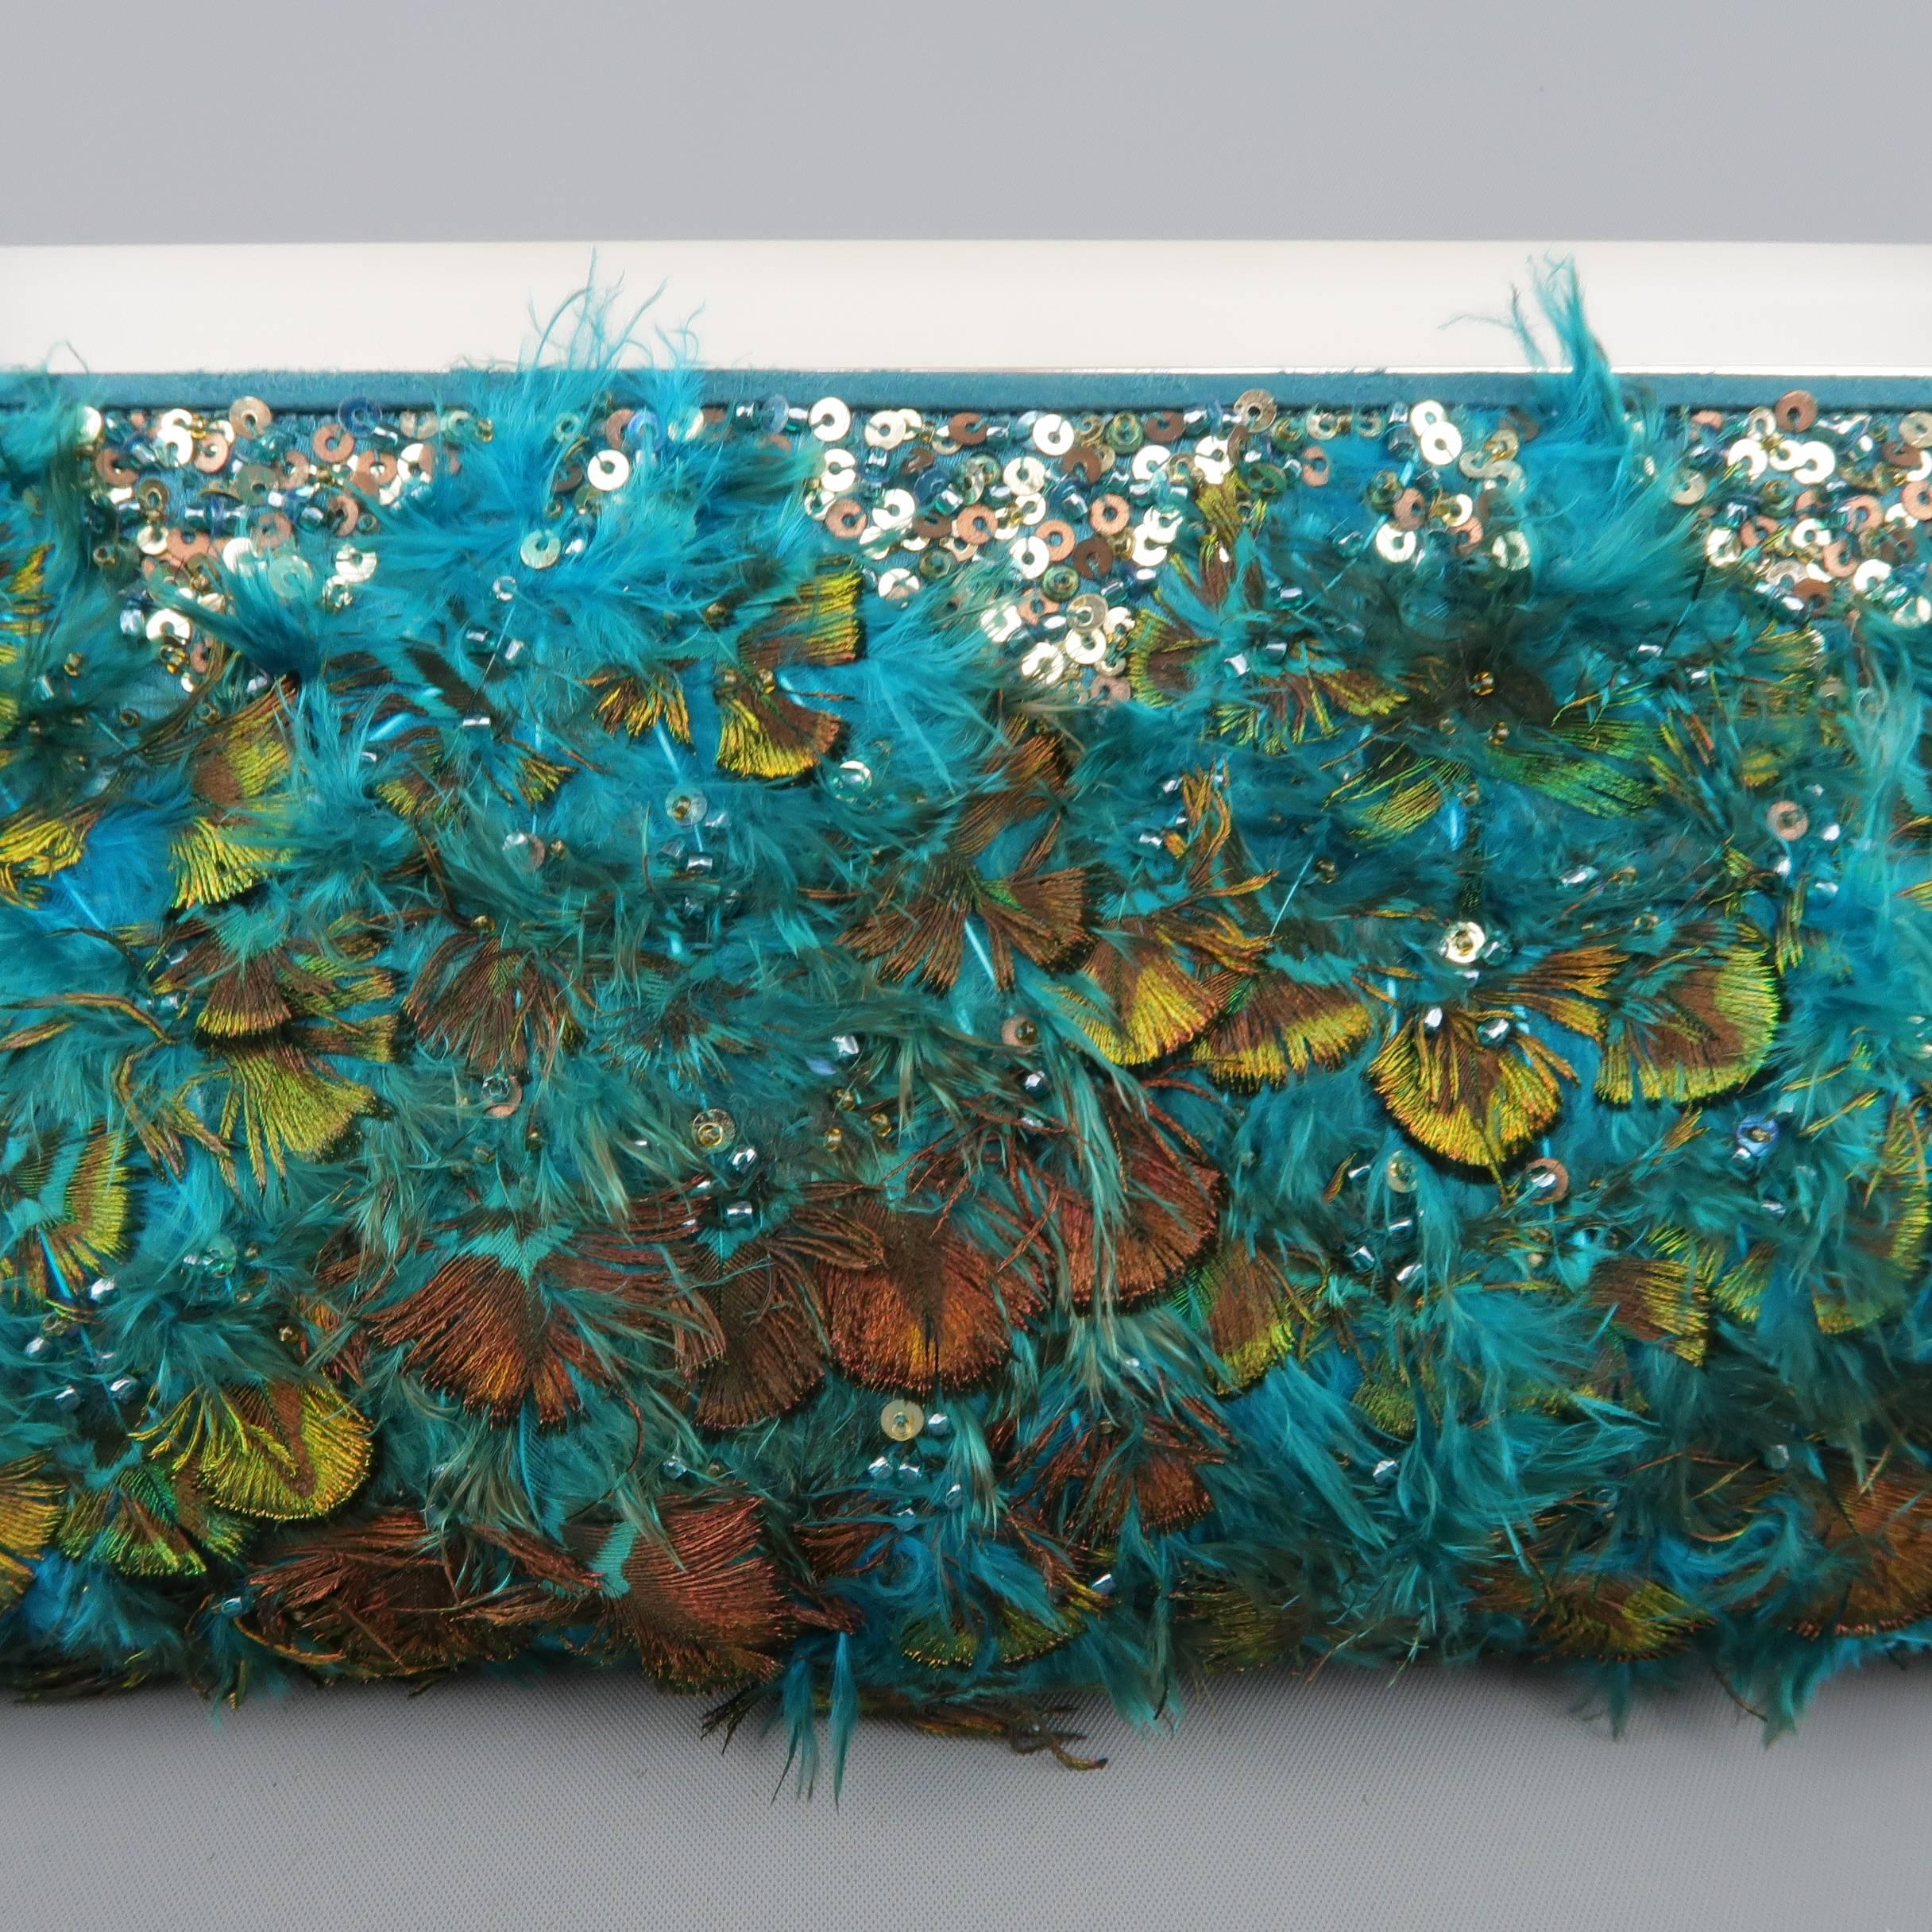 This fabulous Judith Leiber evening clutch comes in a vibrant teal green silk satin completely embellished with peacock feather and sequins with a matte lucite handle detailed with blue and white art deco style crystal adornments, optional silver